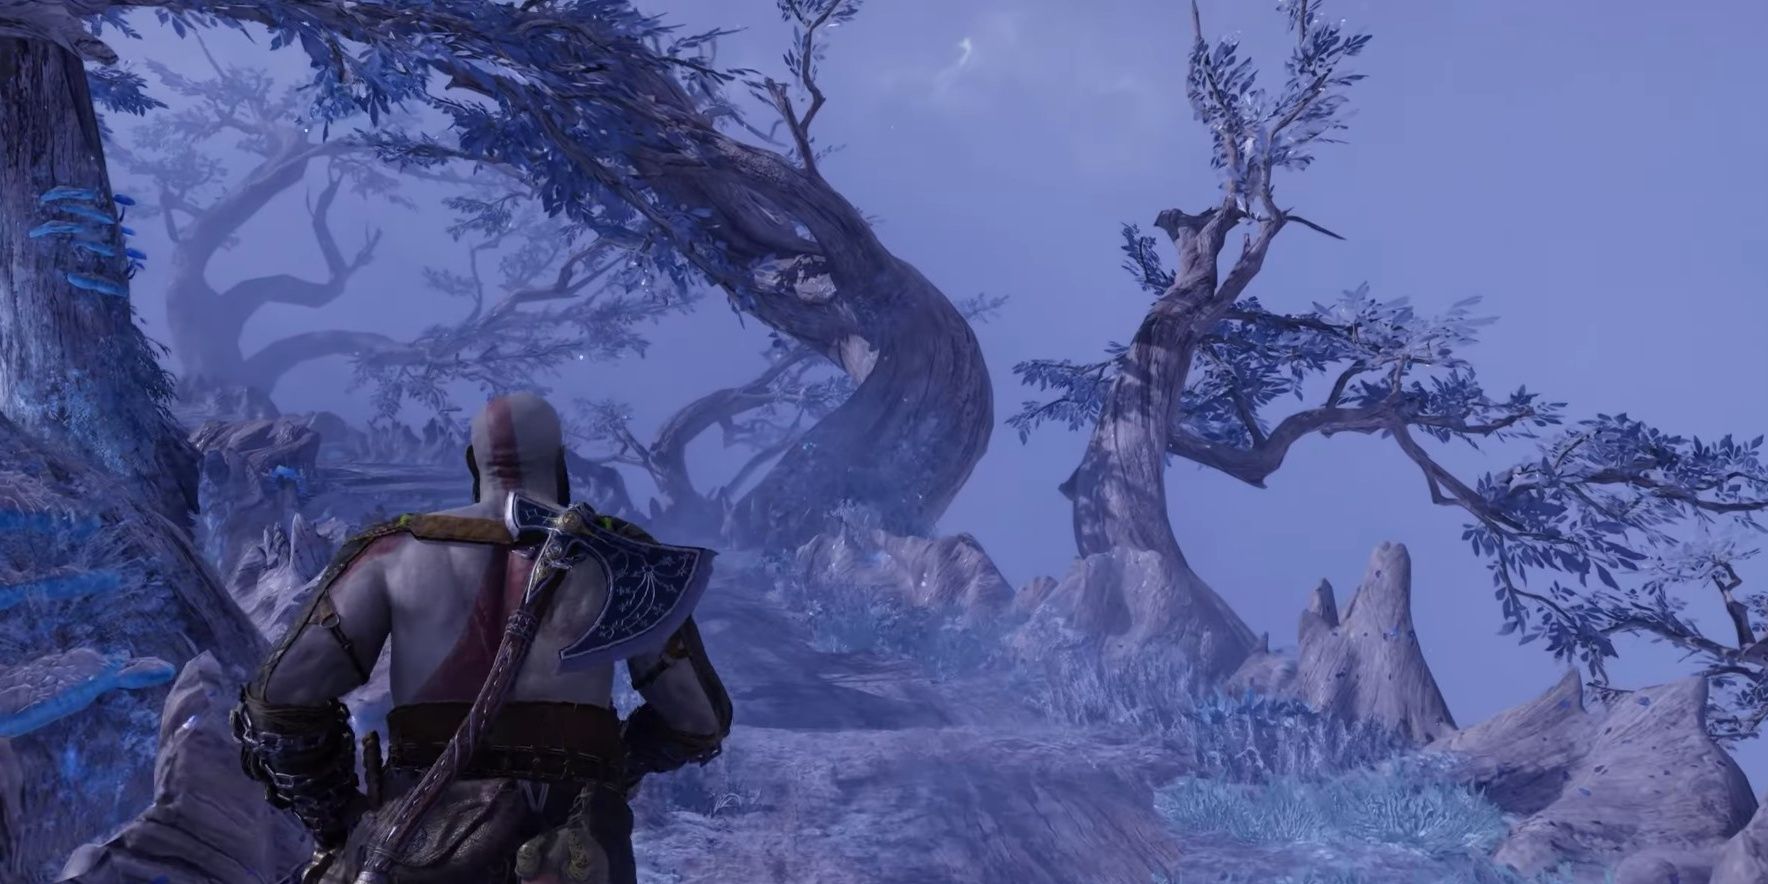 Kratos runs to his next destination along the branch of the surrounding ethereal environment of the World Tree.